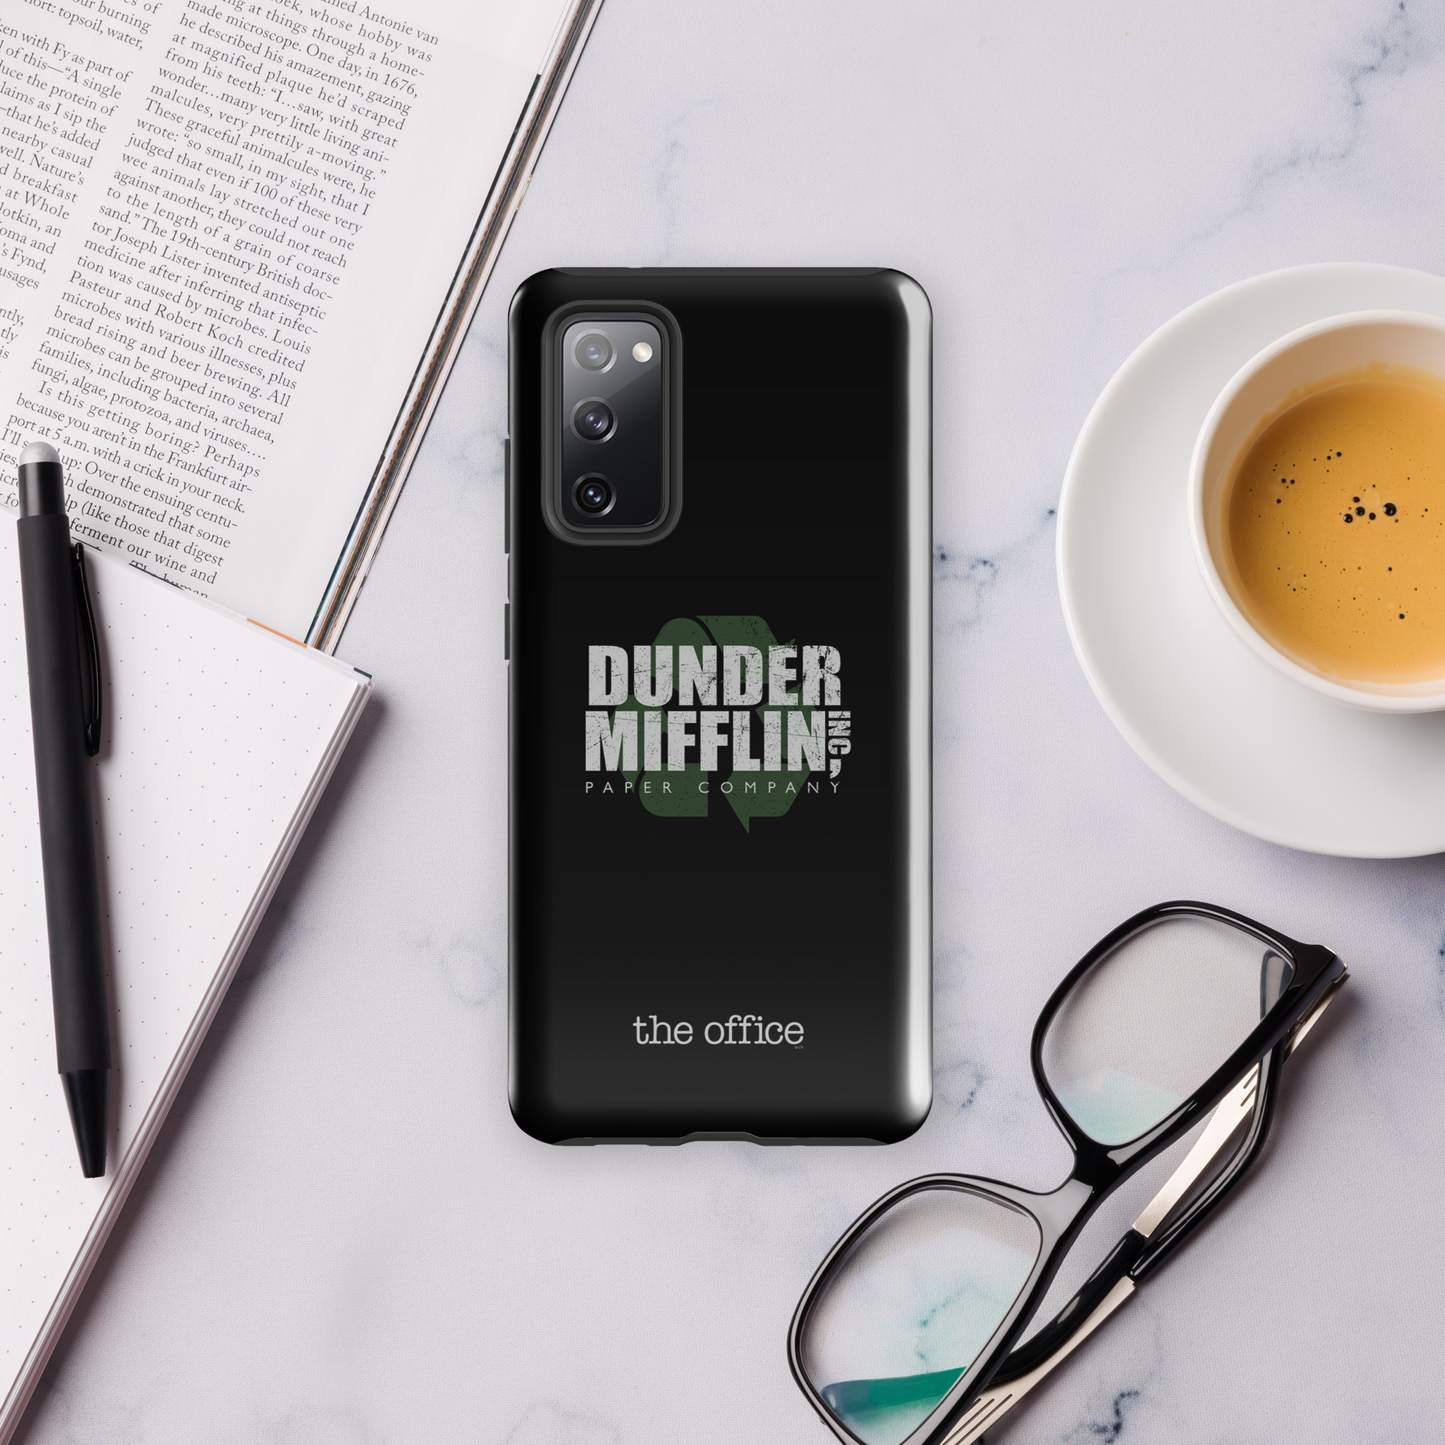 The Office Dunder Mifflin Recycle Tough Phone Case - Samsung